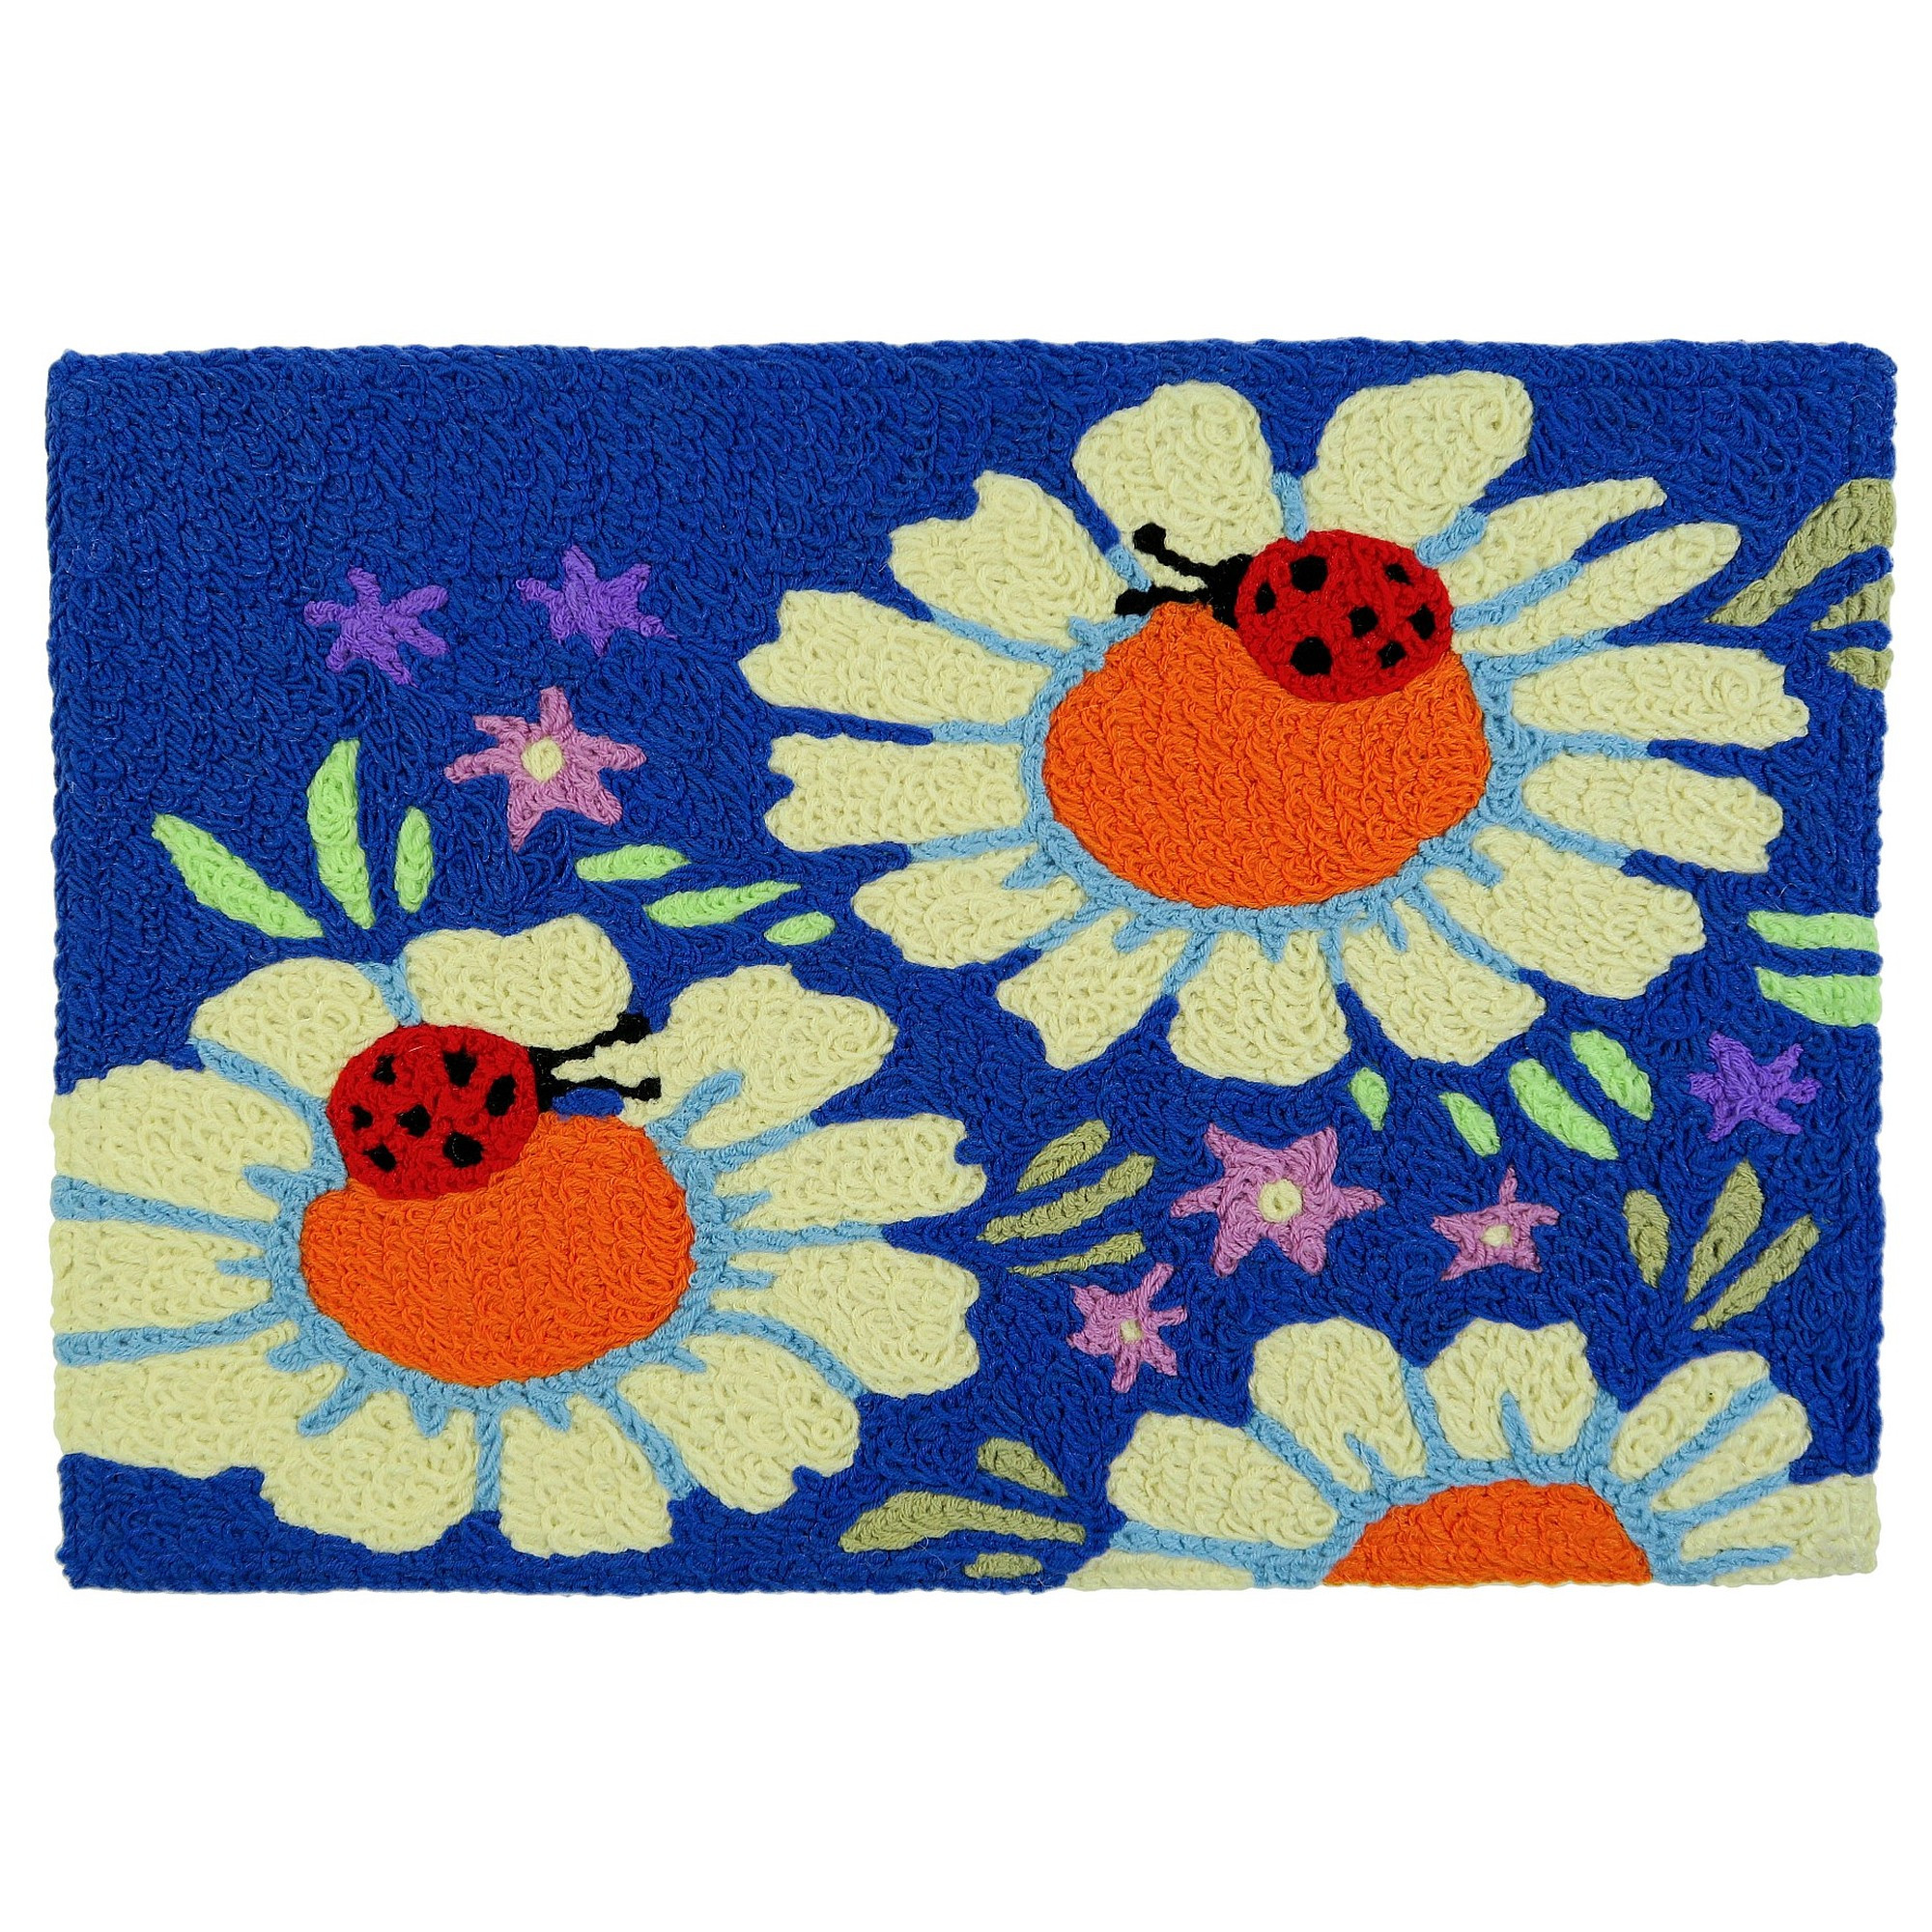 Ladybugs on Daisies Jellybean Accent Floral Rug with Flowers 20" x 30"